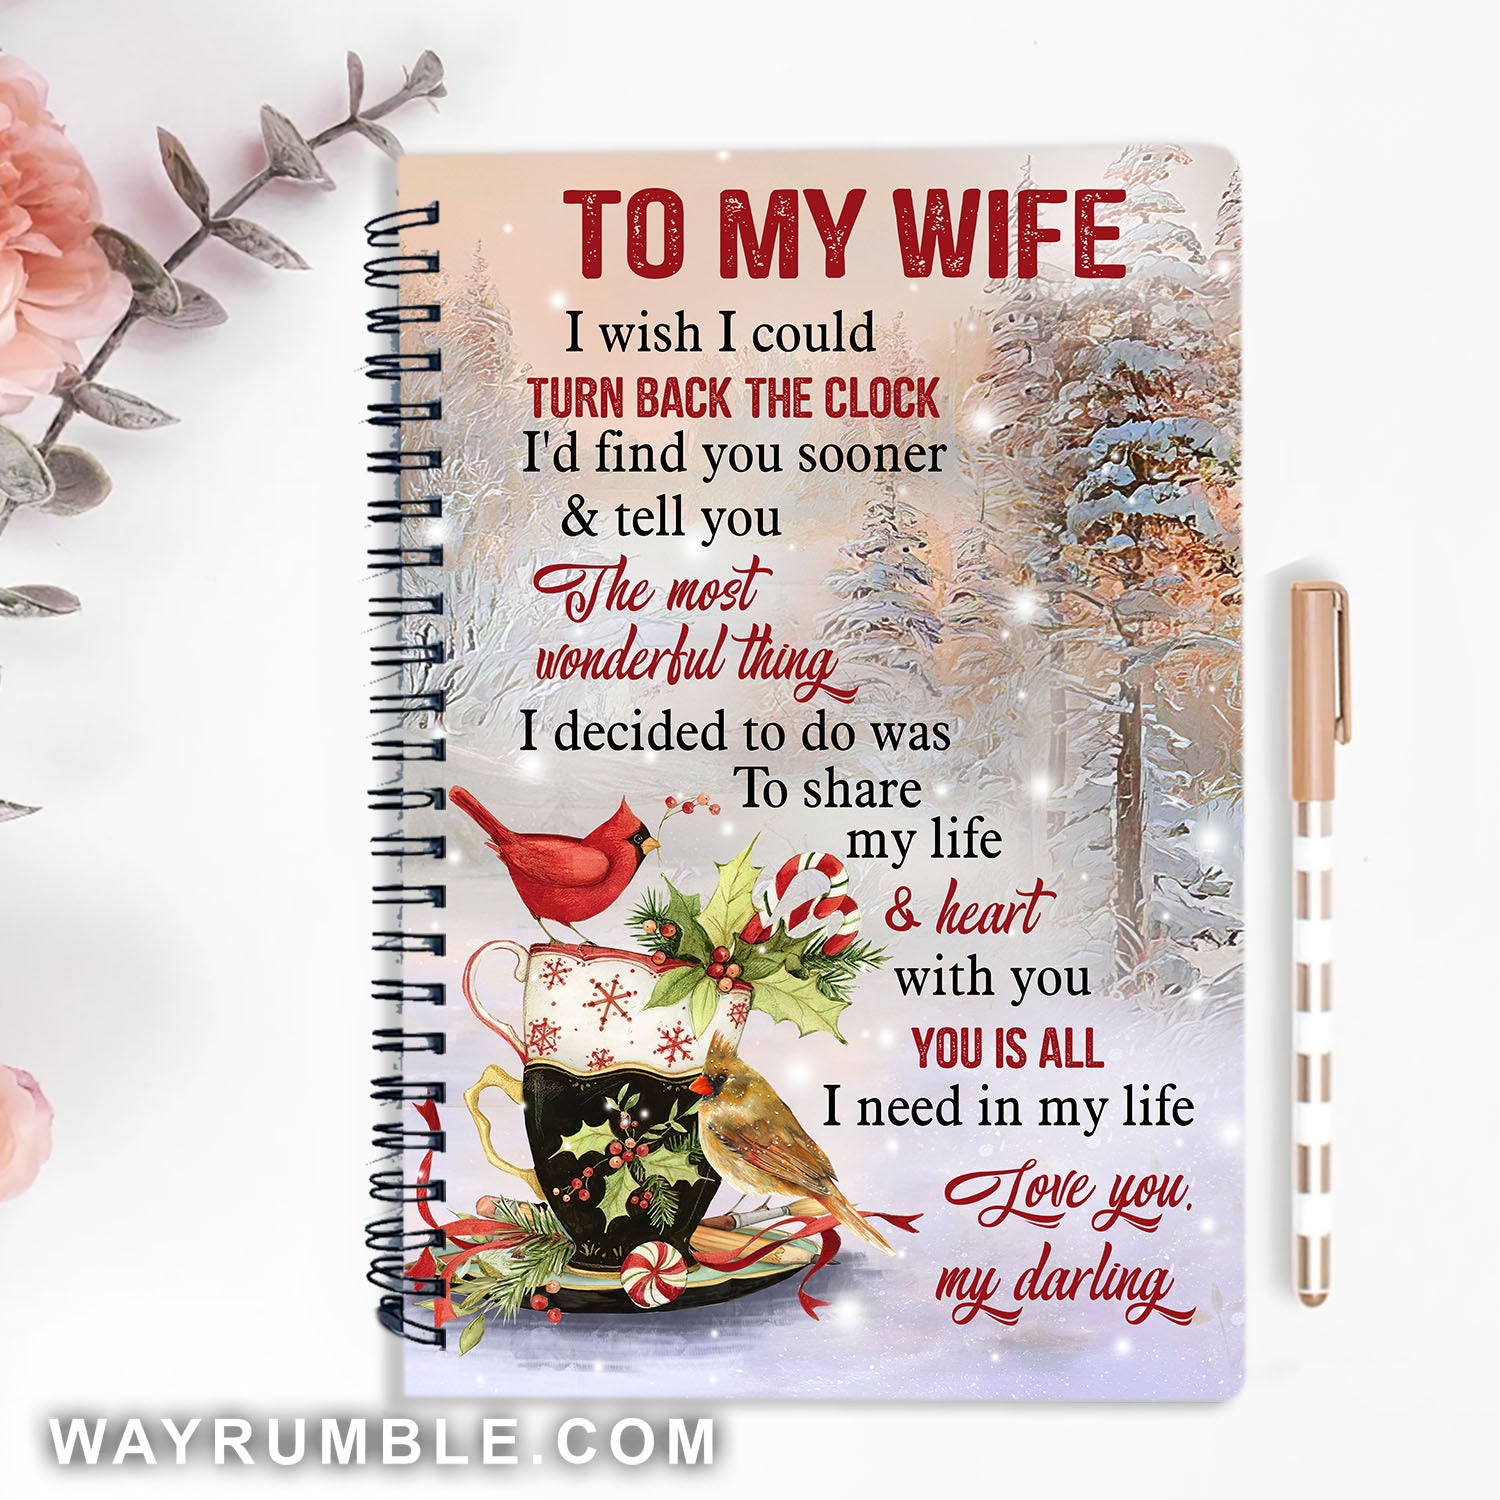 To my wife, Cardinal painting, Winter tree, Chocolate cup, You is all I need in my life - Couple, Christmas, Spiral Journal